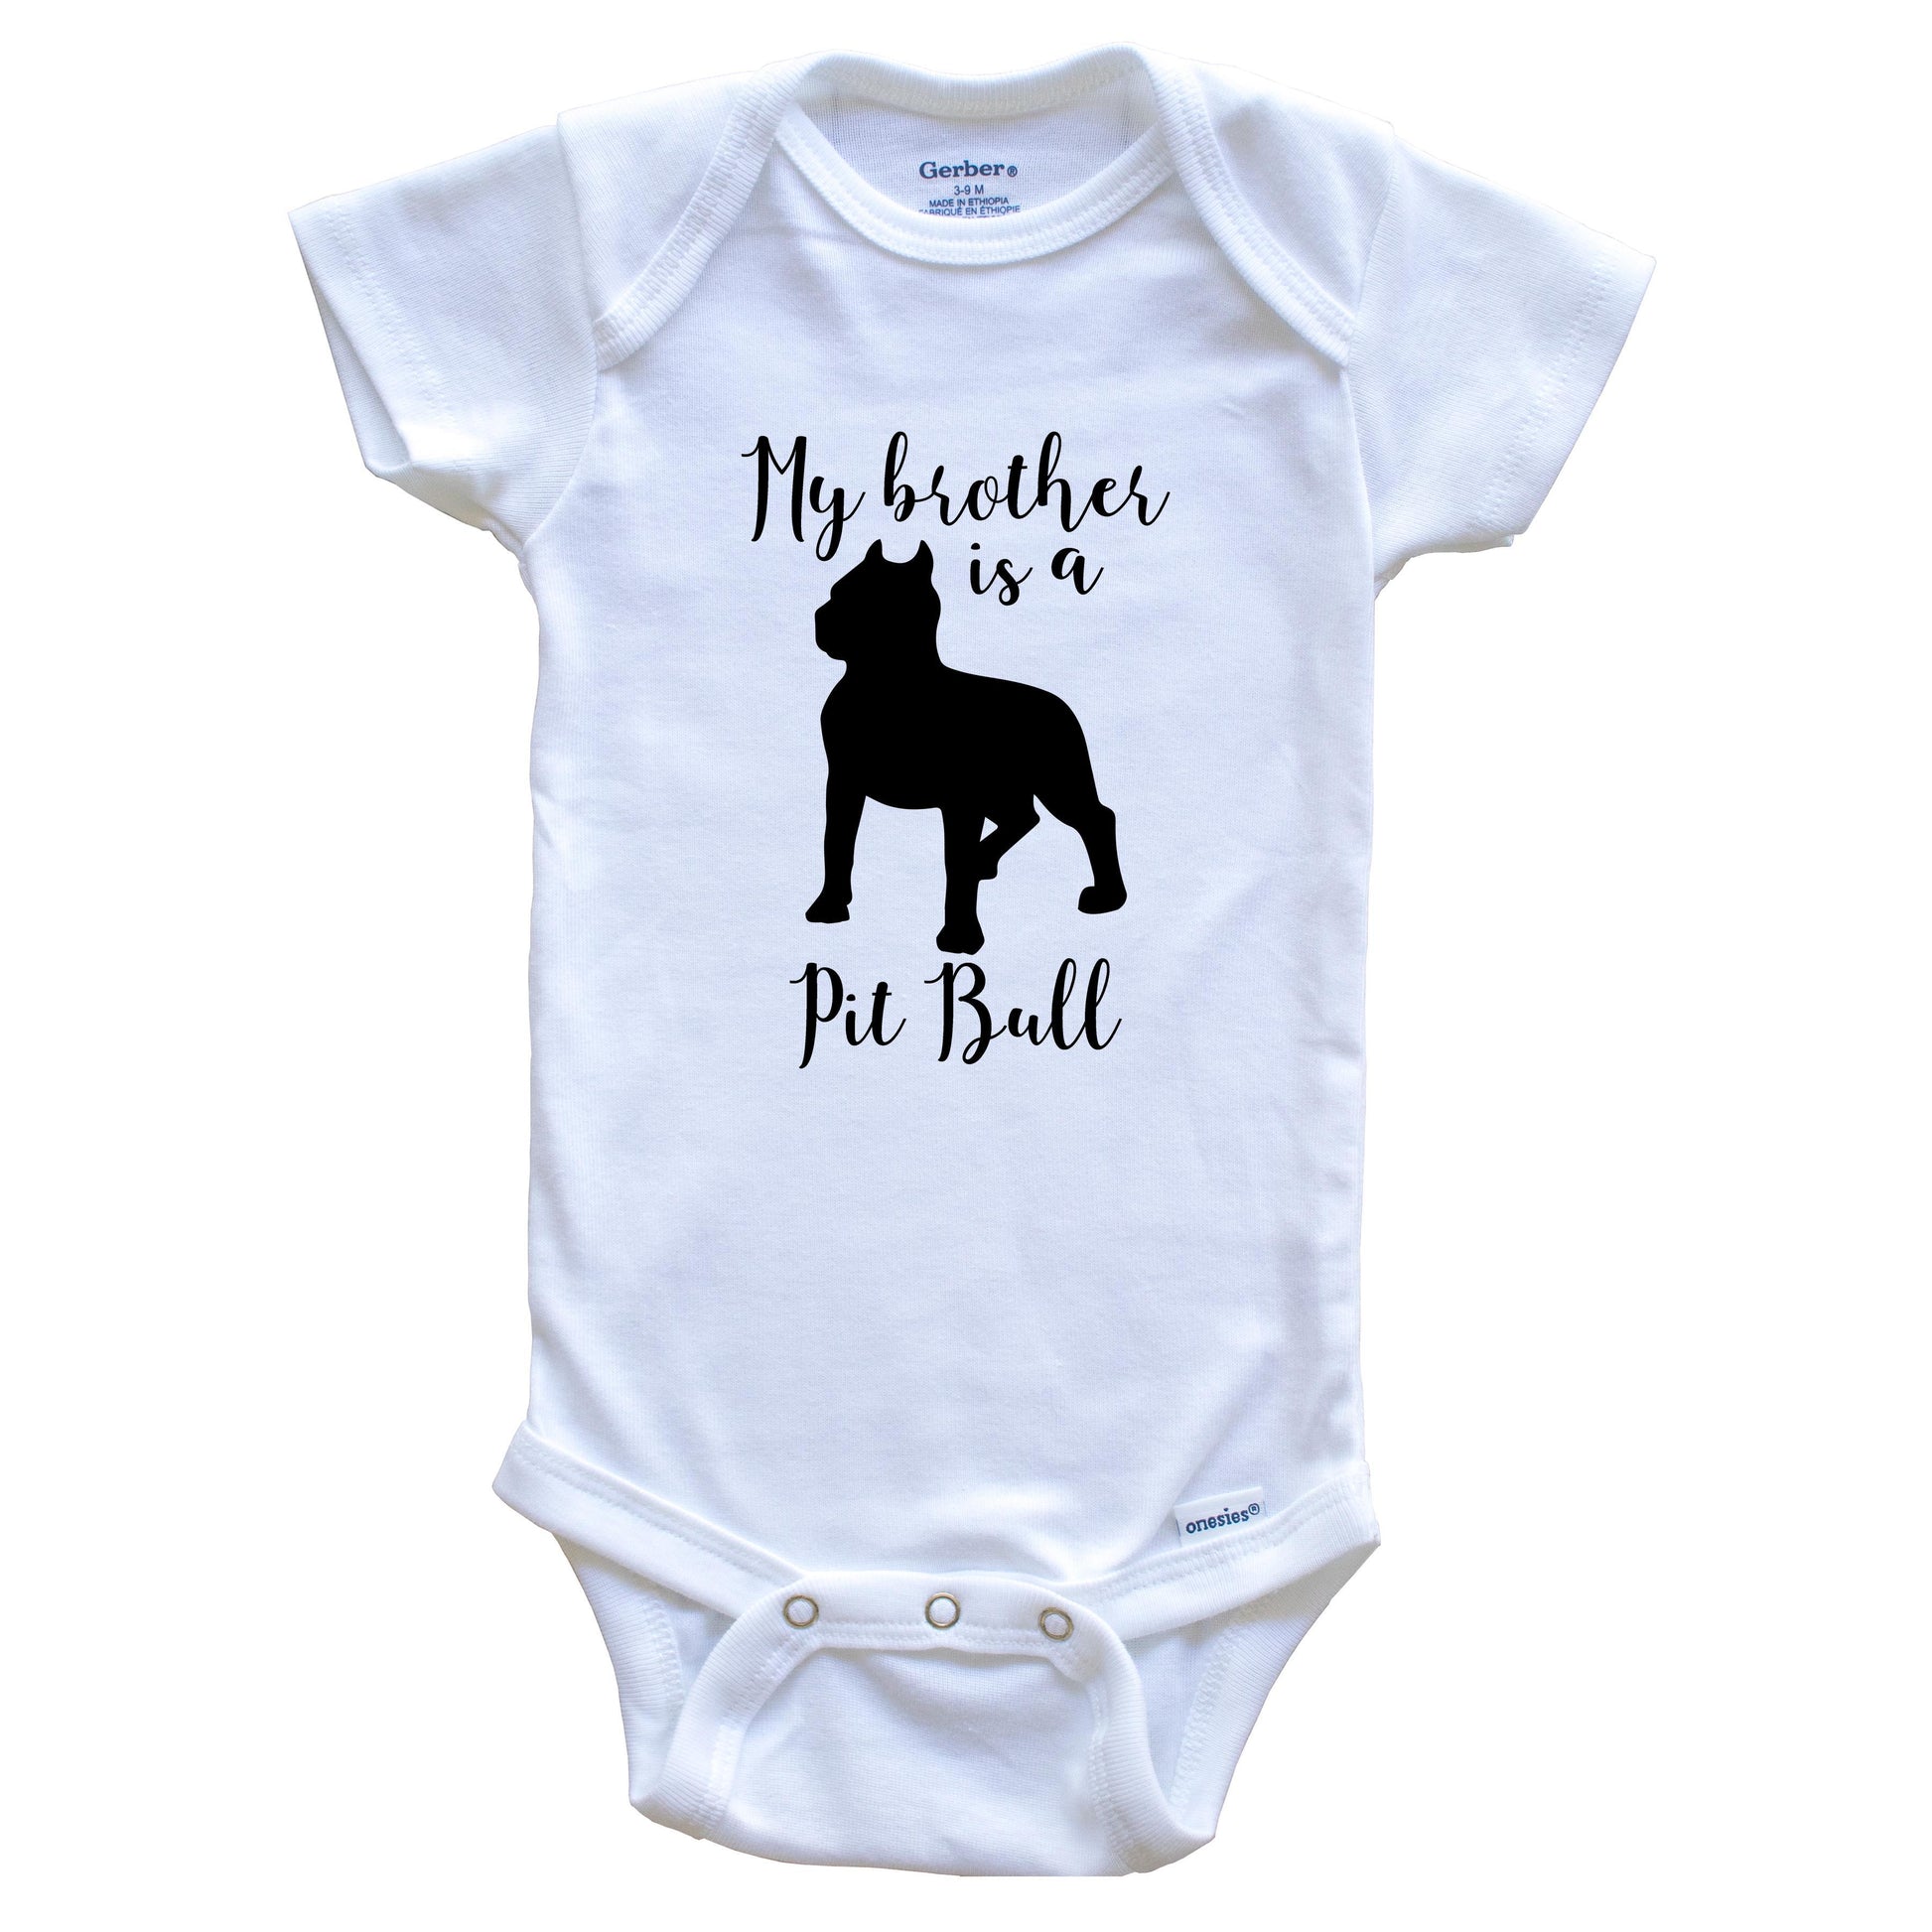 My Brother Is A Pit Bull Cute Dog Baby Onesie - Pit Bull One Piece Baby Bodysuit